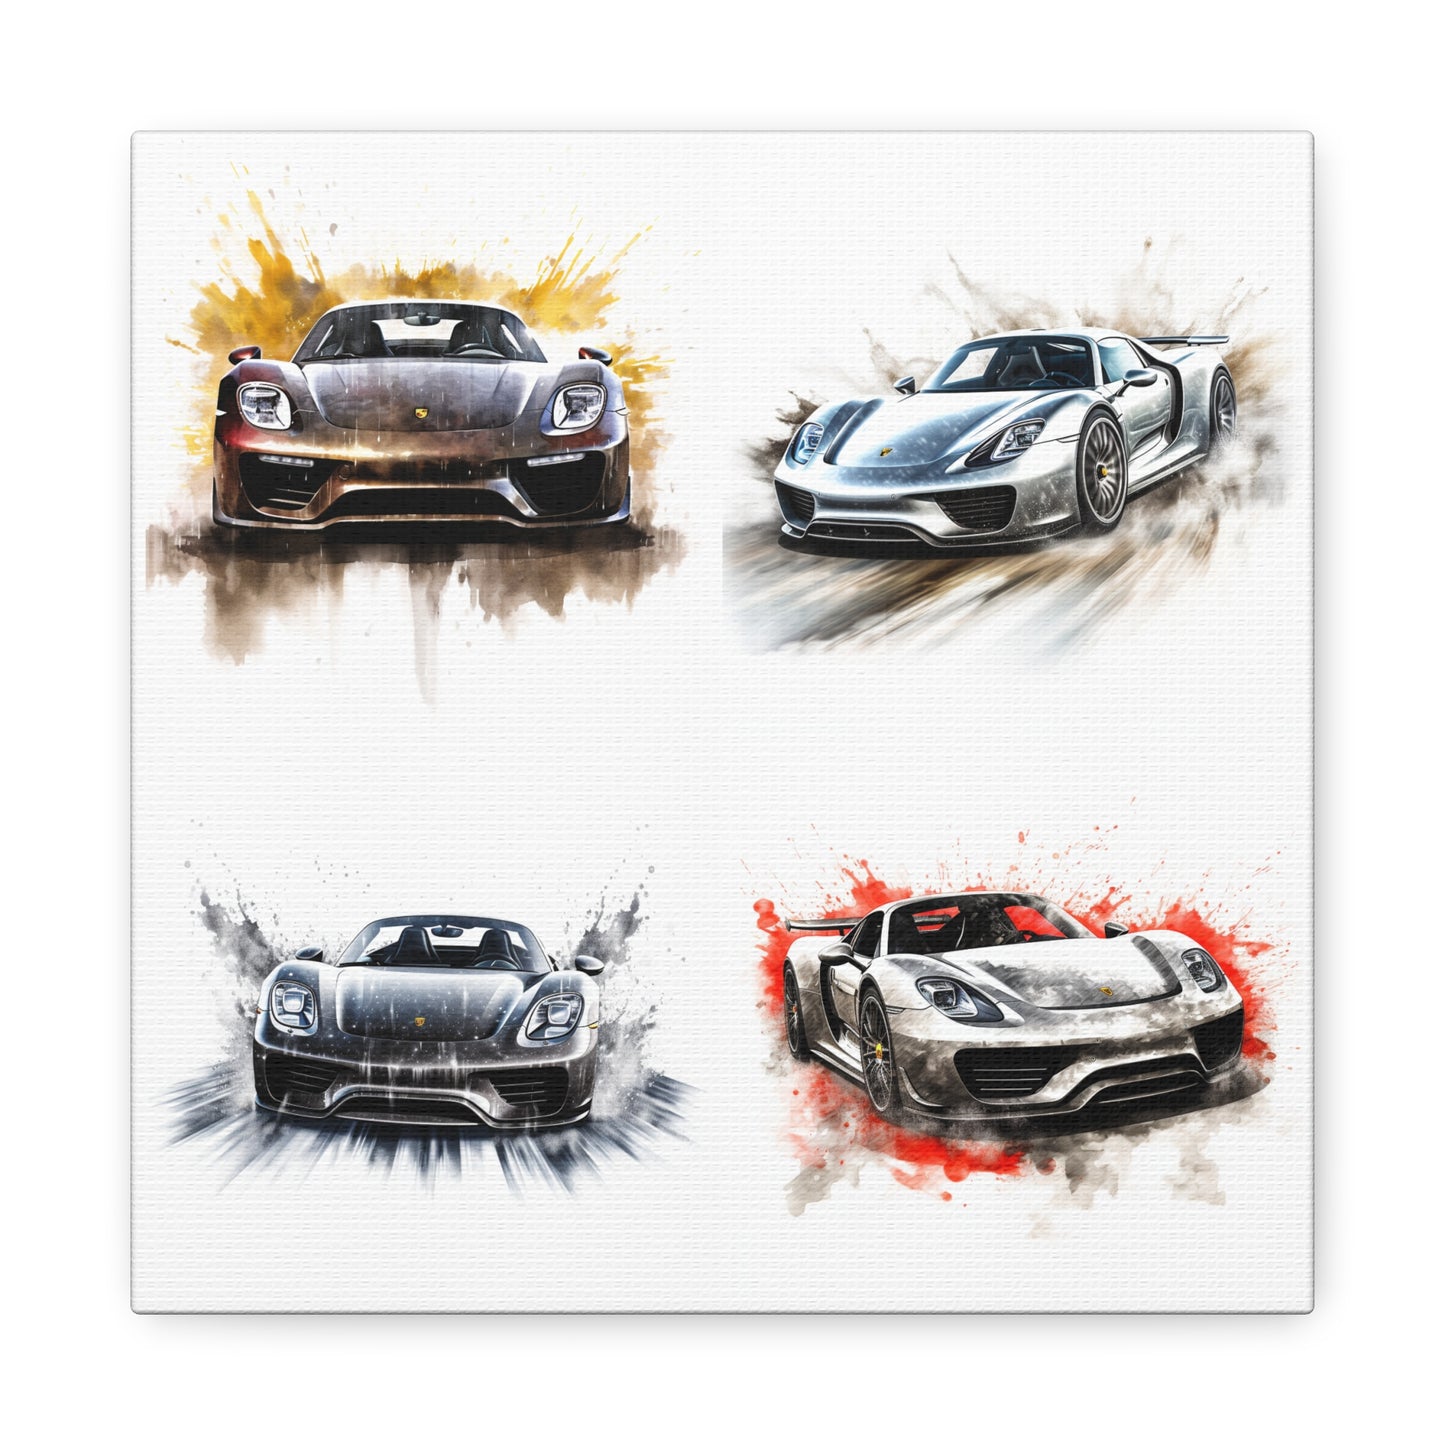 Canvas Gallery Wraps 918 Spyder white background driving fast with water splashing 5